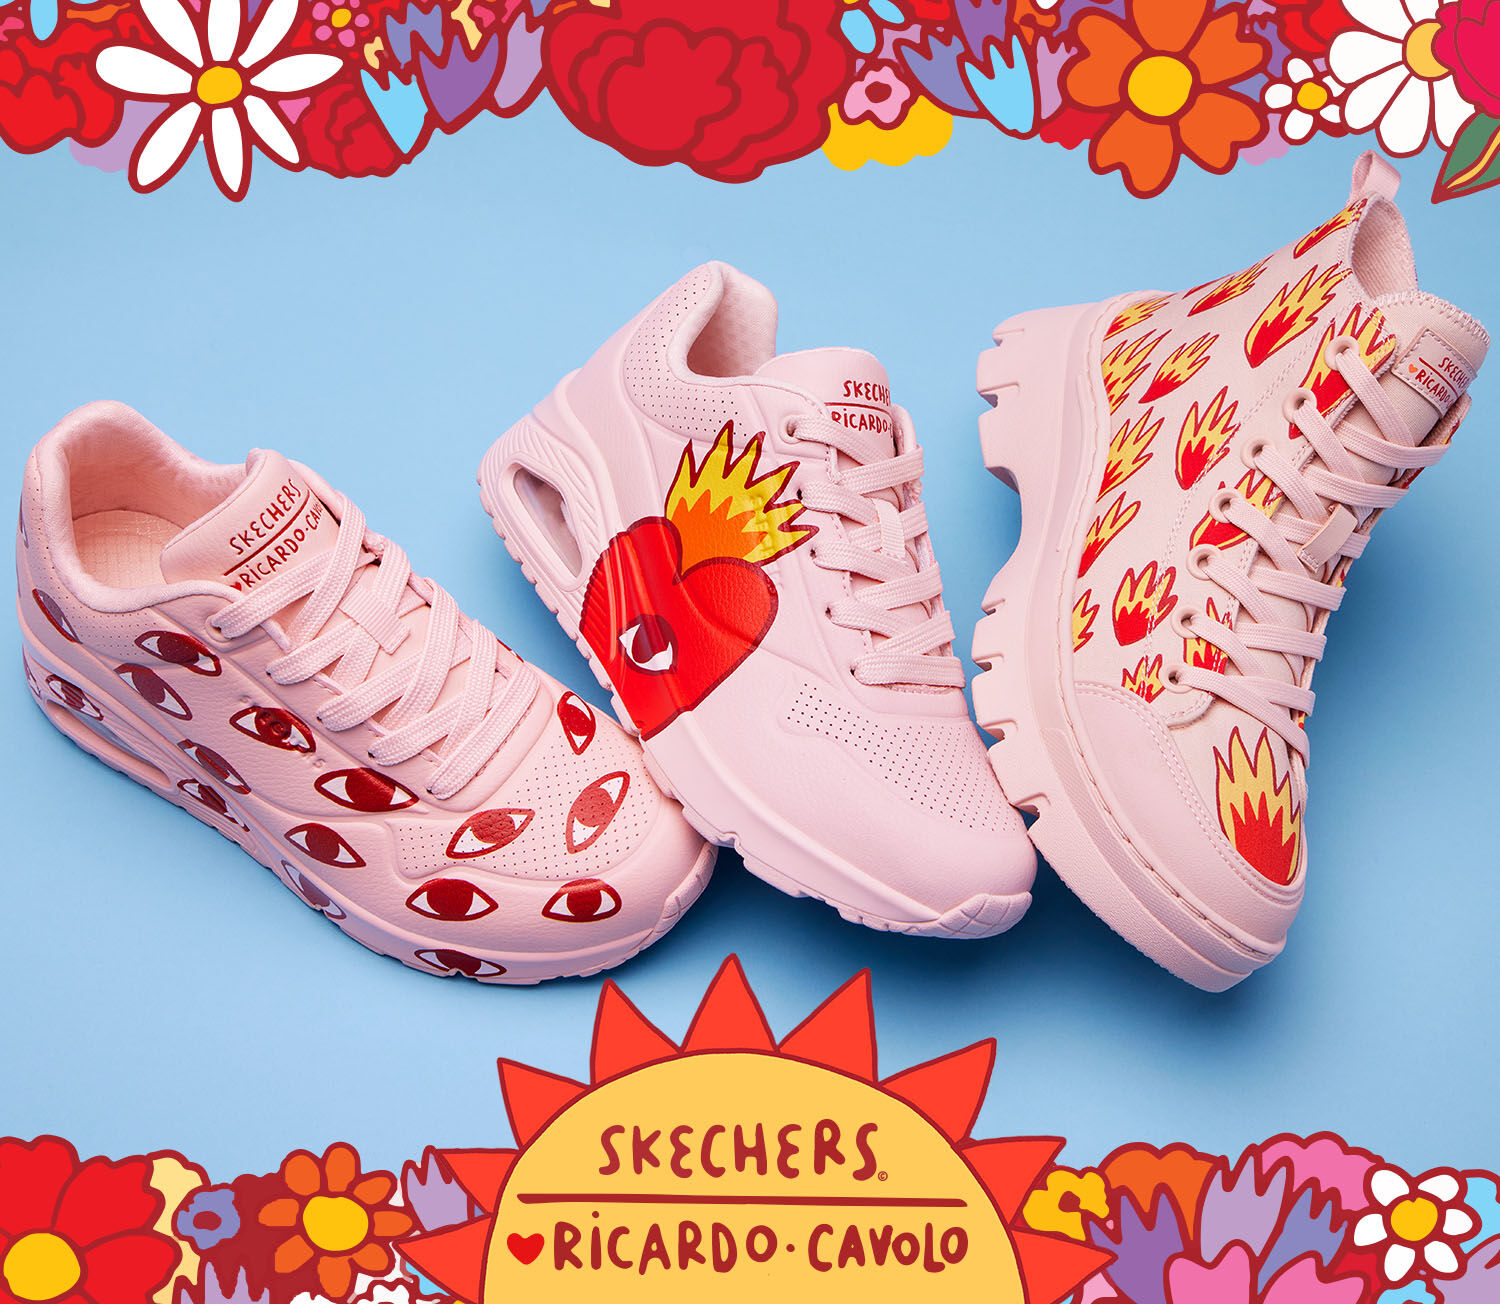 SKECHERS UK Official Site | The Comfort Technology Company